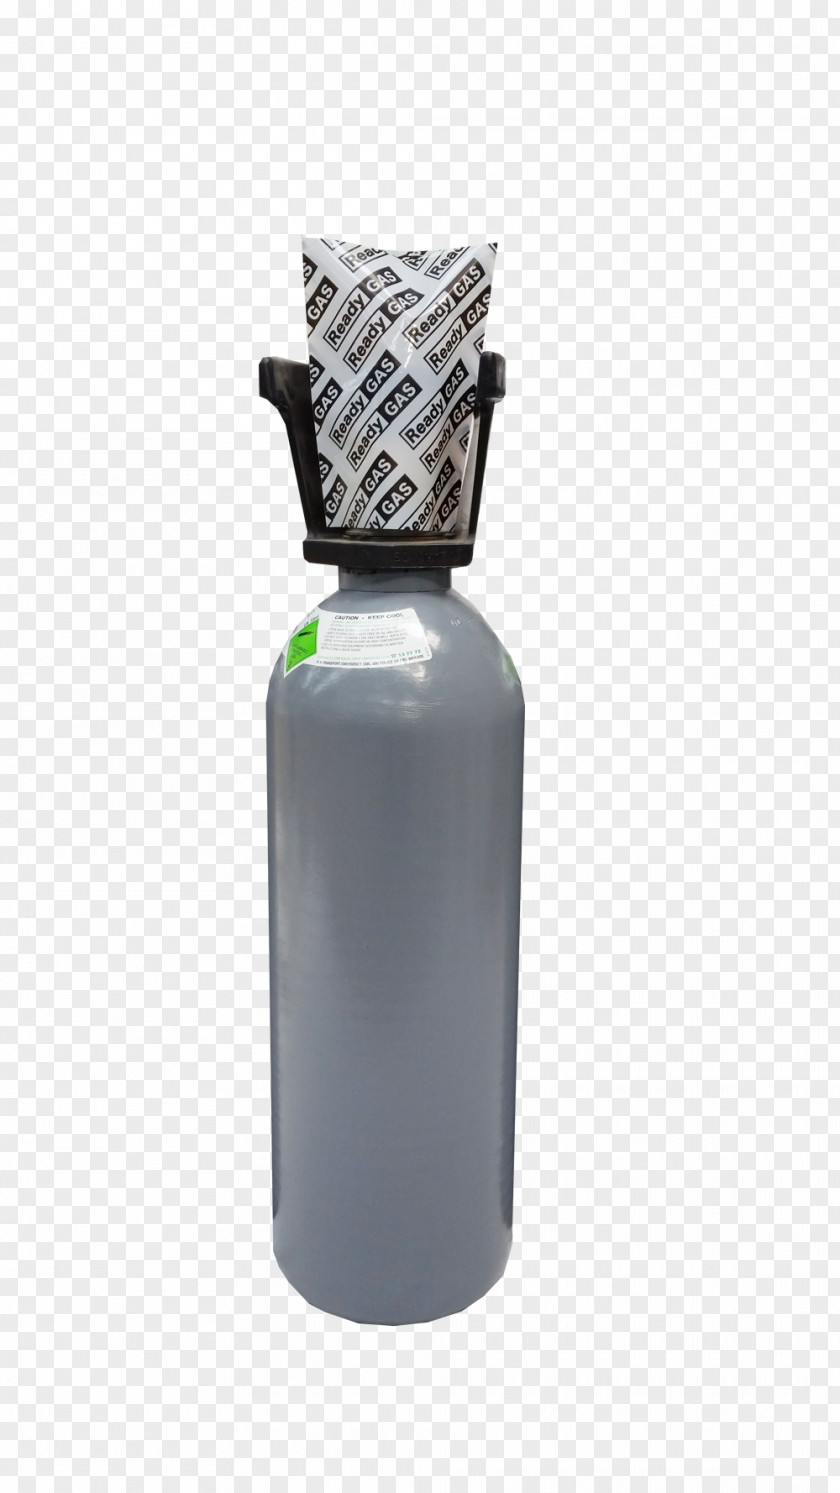 Ready Gas Water Bottles Cylinder PNG